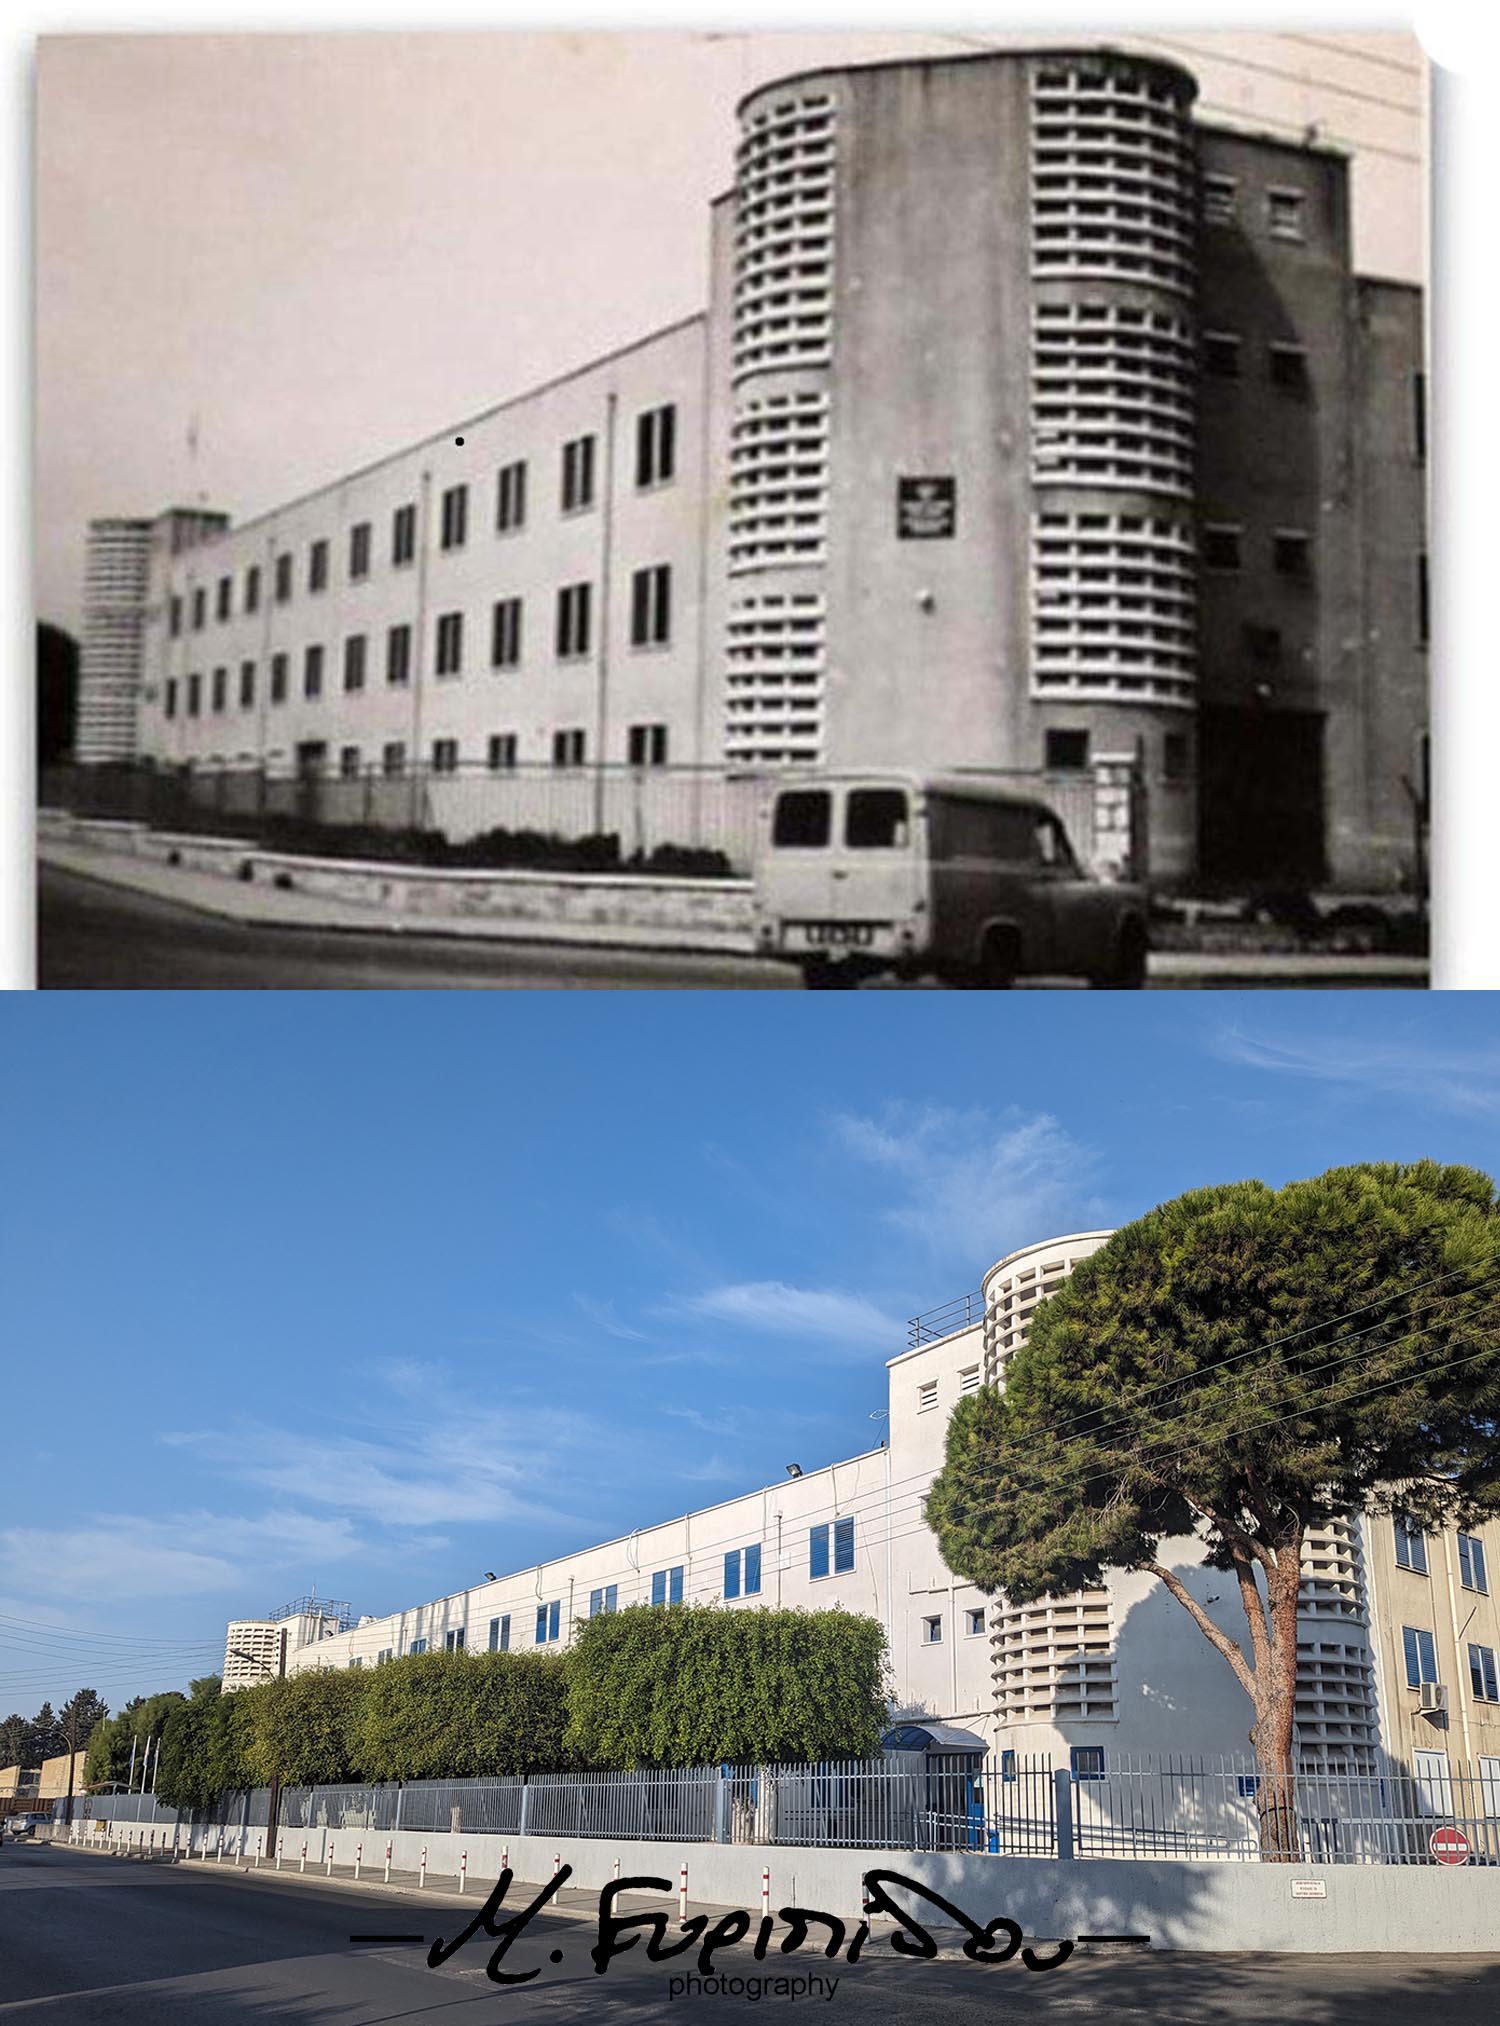 Cyprus Limassol central police station 1960s (?) and 2023